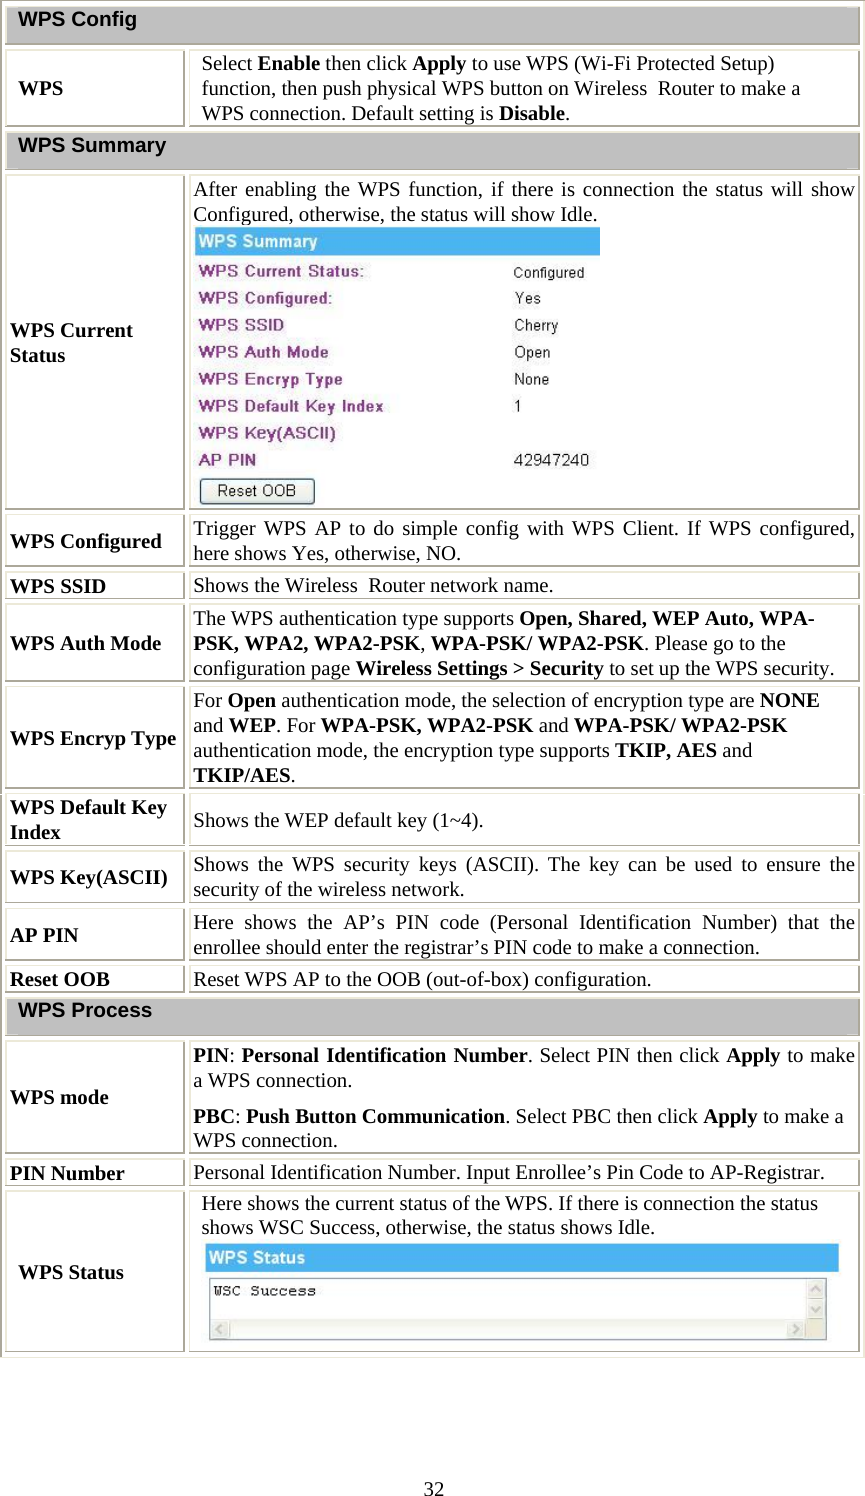   32WPS Config WPS  Select Enable then click Apply to use WPS (Wi-Fi Protected Setup) function, then push physical WPS button on Wireless  Router to make a WPS connection. Default setting is Disable. WPS Summary WPS Current Status After enabling the WPS function, if there is connection the status will show Configured, otherwise, the status will show Idle.  WPS Configured  Trigger WPS AP to do simple config with WPS Client. If WPS configured, here shows Yes, otherwise, NO. WPS SSID  Shows the Wireless  Router network name. WPS Auth Mode  The WPS authentication type supports Open, Shared, WEP Auto, WPA-PSK, WPA2, WPA2-PSK, WPA-PSK/ WPA2-PSK. Please go to the configuration page Wireless Settings &gt; Security to set up the WPS security.  WPS Encryp Type For Open authentication mode, the selection of encryption type are NONE and WEP. For WPA-PSK, WPA2-PSK and WPA-PSK/ WPA2-PSK authentication mode, the encryption type supports TKIP, AES and TKIP/AES. WPS Default Key Index  Shows the WEP default key (1~4). WPS Key(ASCII)  Shows the WPS security keys (ASCII). The key can be used to ensure the security of the wireless network.  AP PIN  Here shows the AP’s PIN code (Personal Identification Number) that the enrollee should enter the registrar’s PIN code to make a connection. Reset OOB  Reset WPS AP to the OOB (out-of-box) configuration.  WPS Process WPS mode PIN: Personal Identification Number. Select PIN then click Apply to make a WPS connection. PBC: Push Button Communication. Select PBC then click Apply to make a WPS connection.PIN Number  Personal Identification Number. Input Enrollee’s Pin Code to AP-Registrar. WPS Status Here shows the current status of the WPS. If there is connection the status shows WSC Success, otherwise, the status shows Idle.   